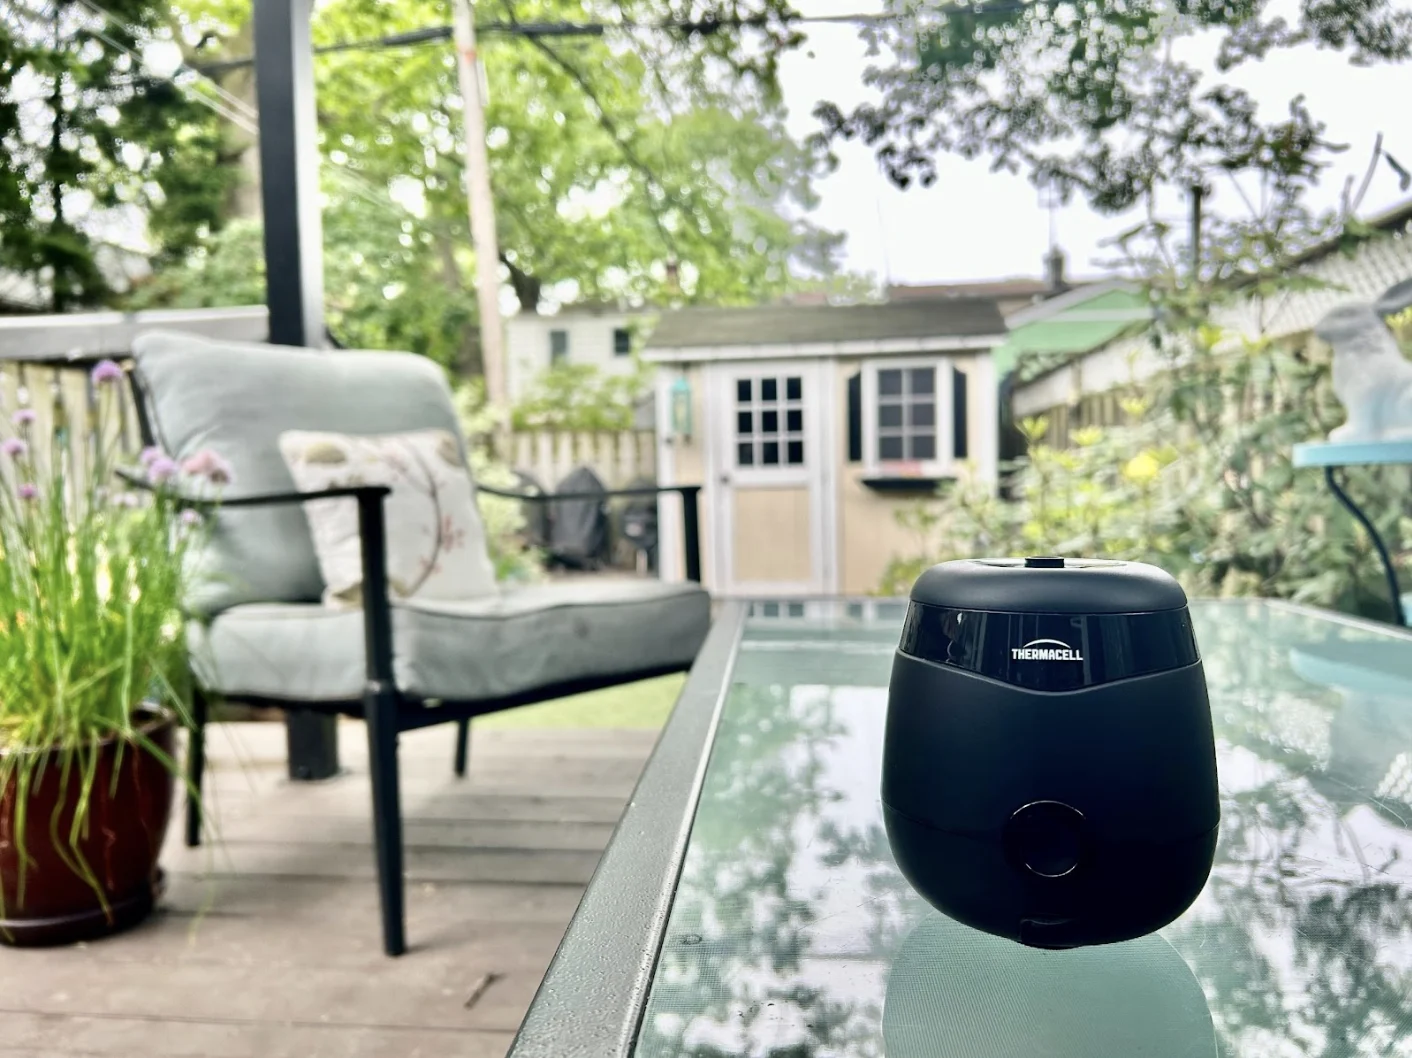 The Weather Network (taken by Lina Truong): Thermacell helps keep mosquitoes away